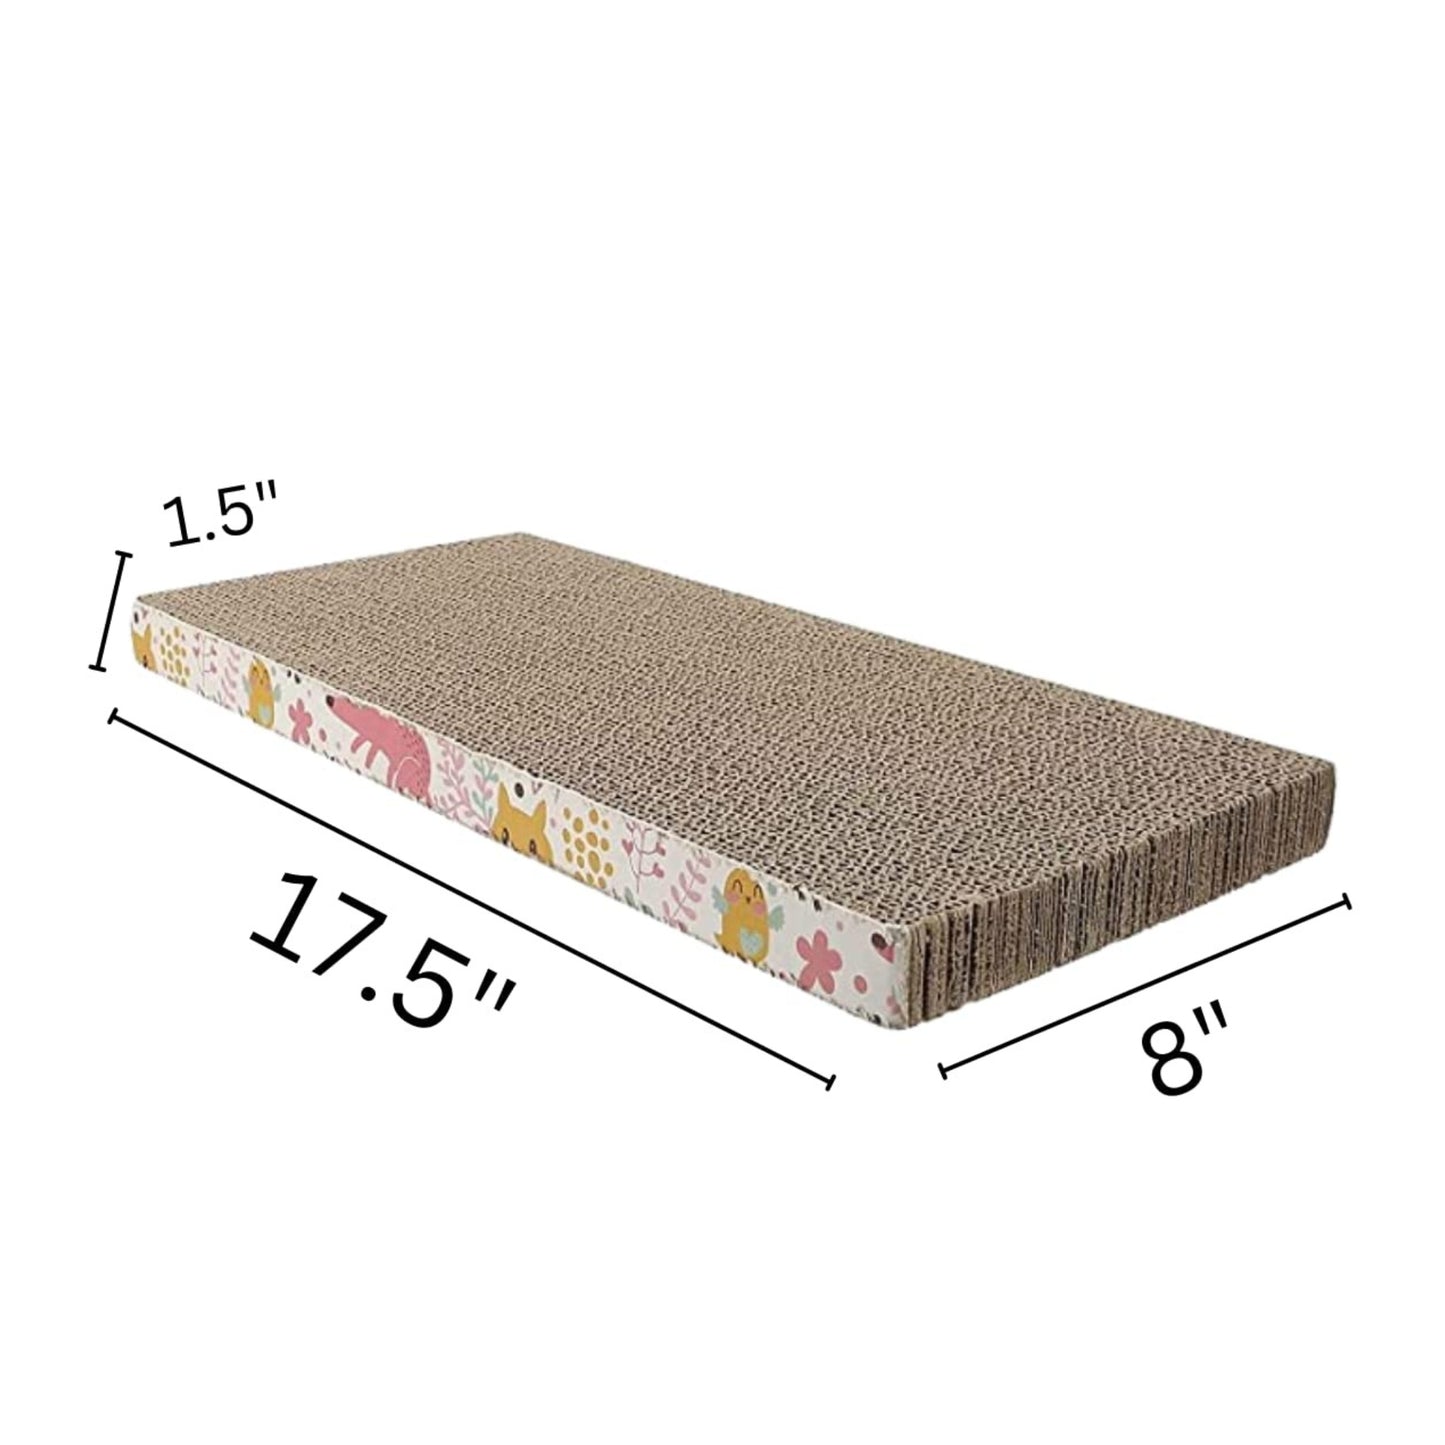 Foodie Puppies Corrugated Flat Scratcher for Cats & Kittens